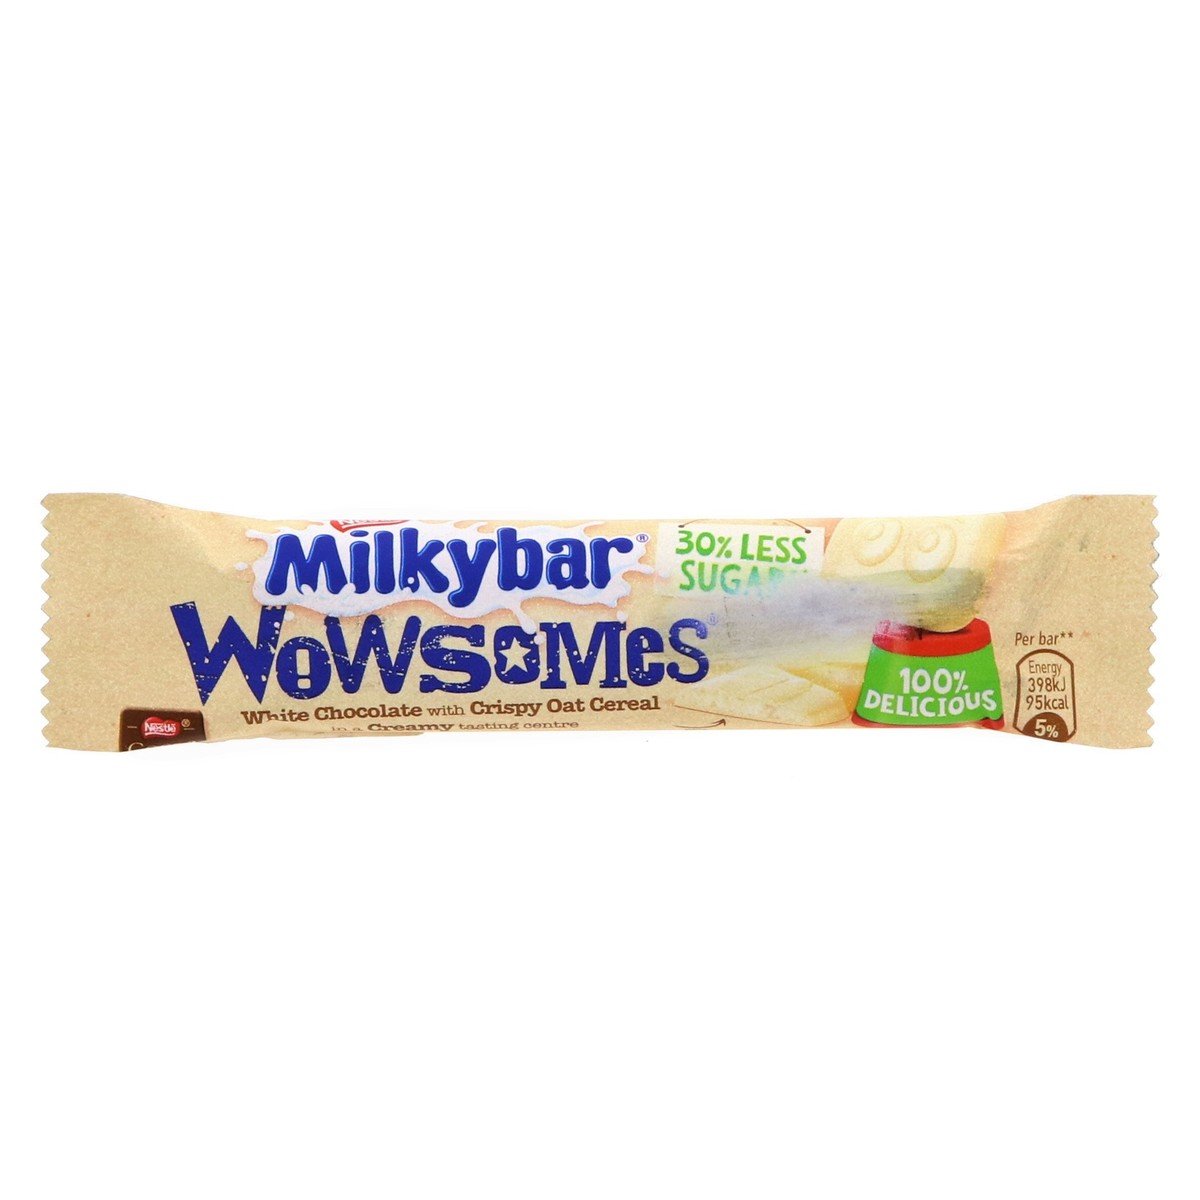 Nestle Milkybar Wowsomes White Chocolate with Crispy Oat Cereal 18 g